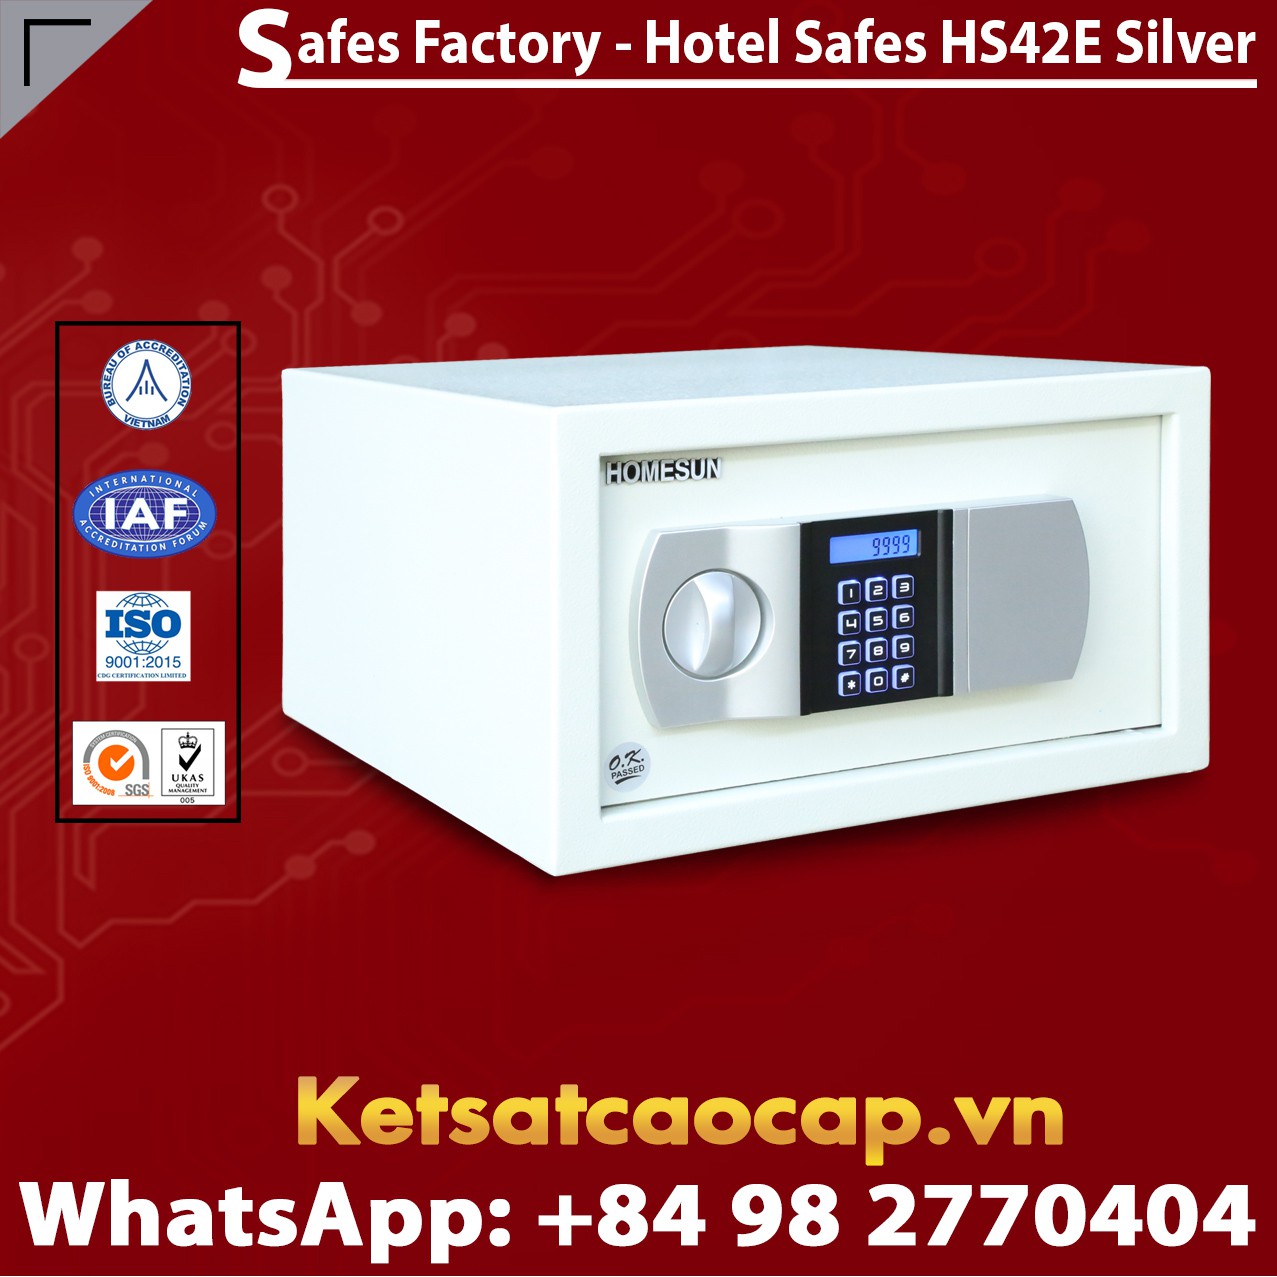 Best Sellers In Hotel Safes HOMESUN HS42 E Silver